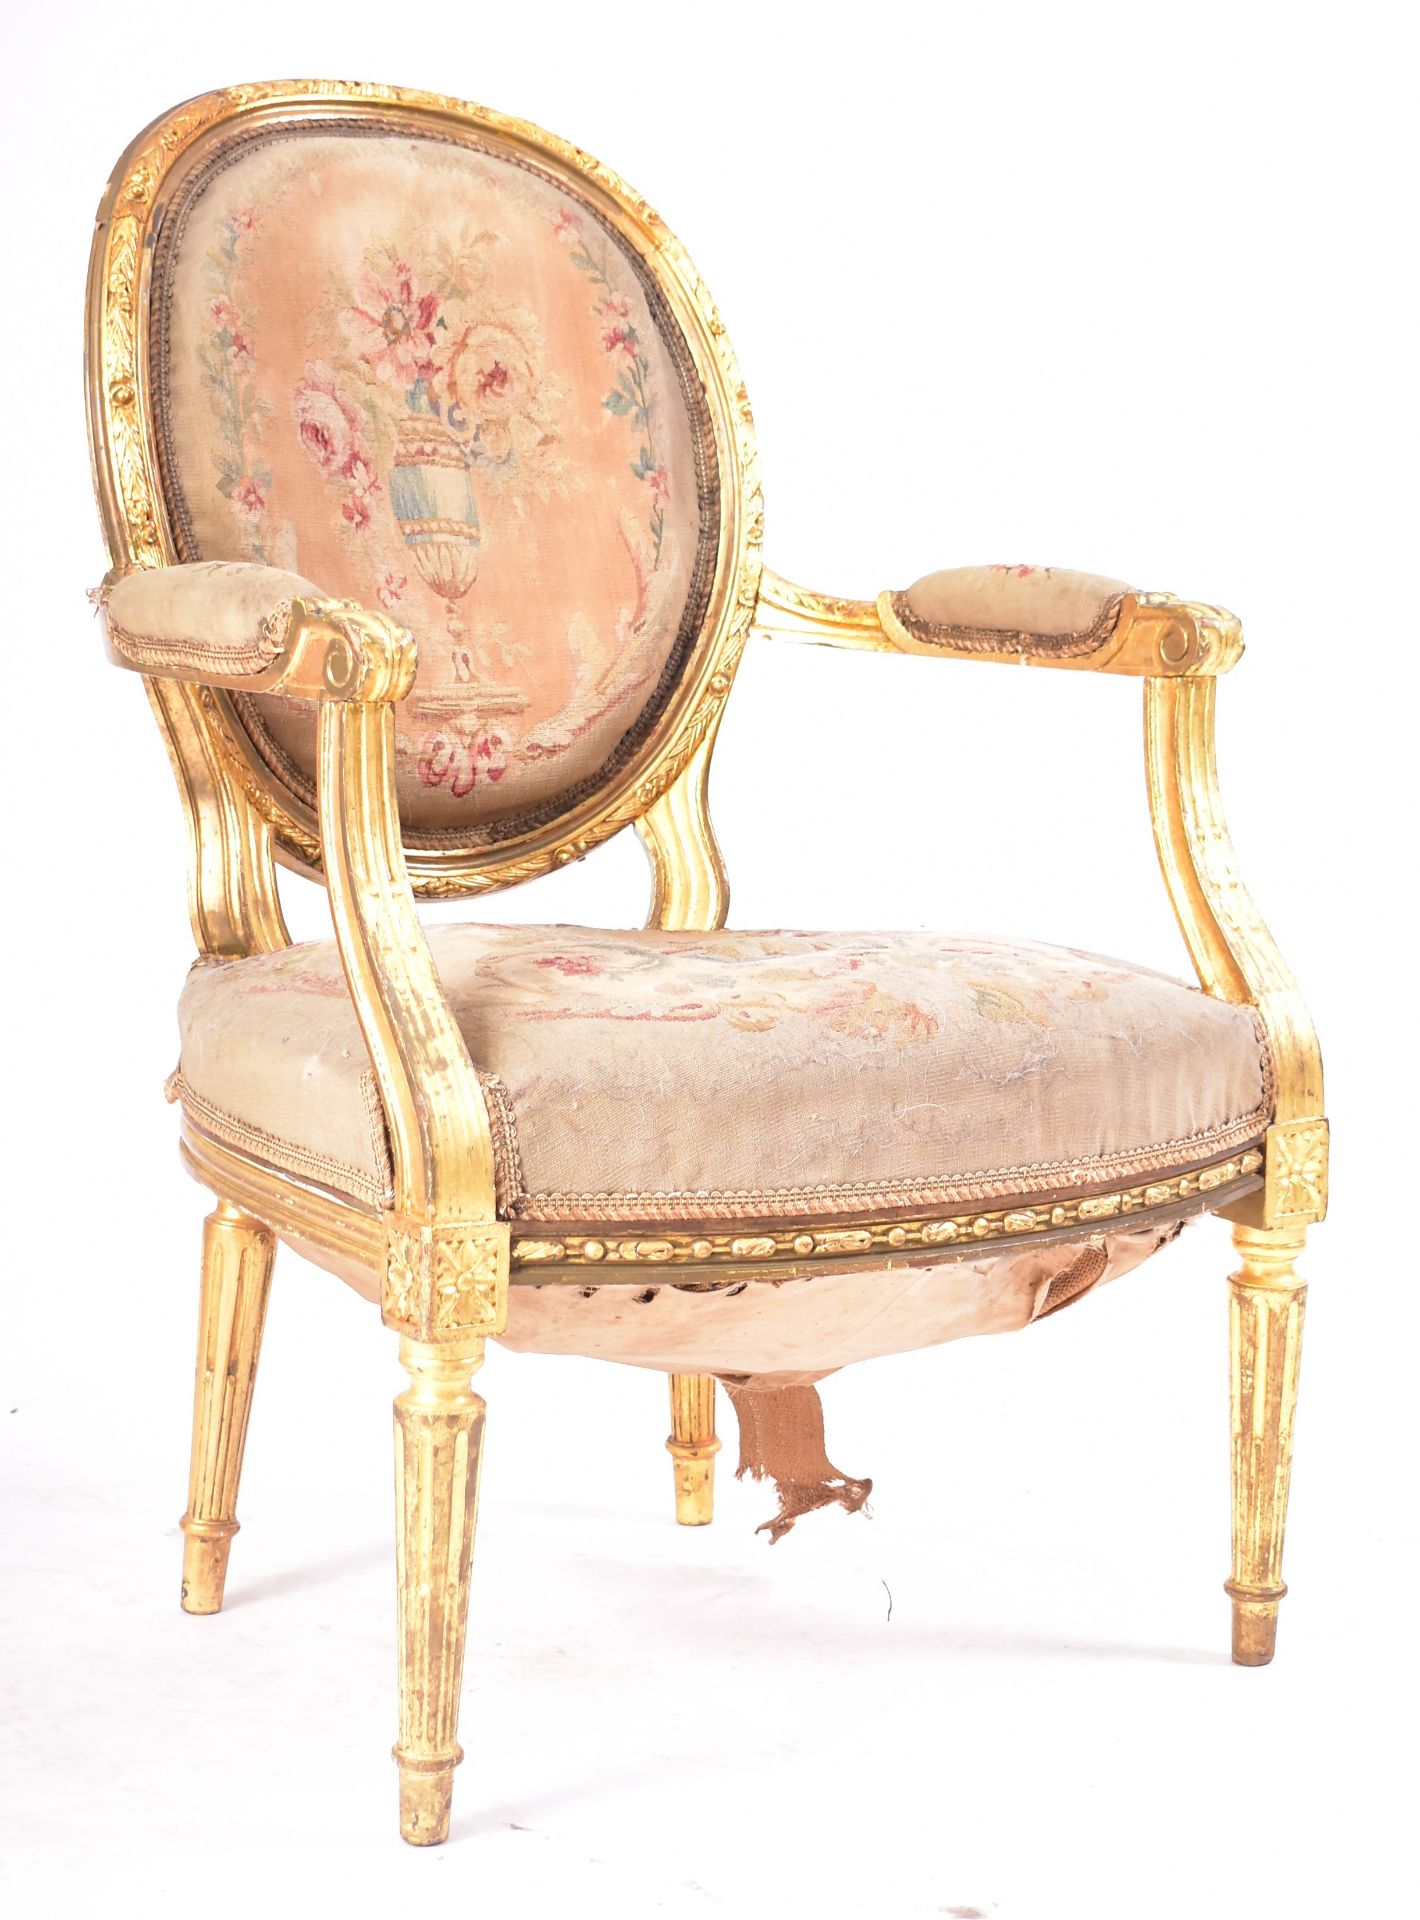 19TH CENTURY FRENCH GILTWOOD ELBOW CHAIR